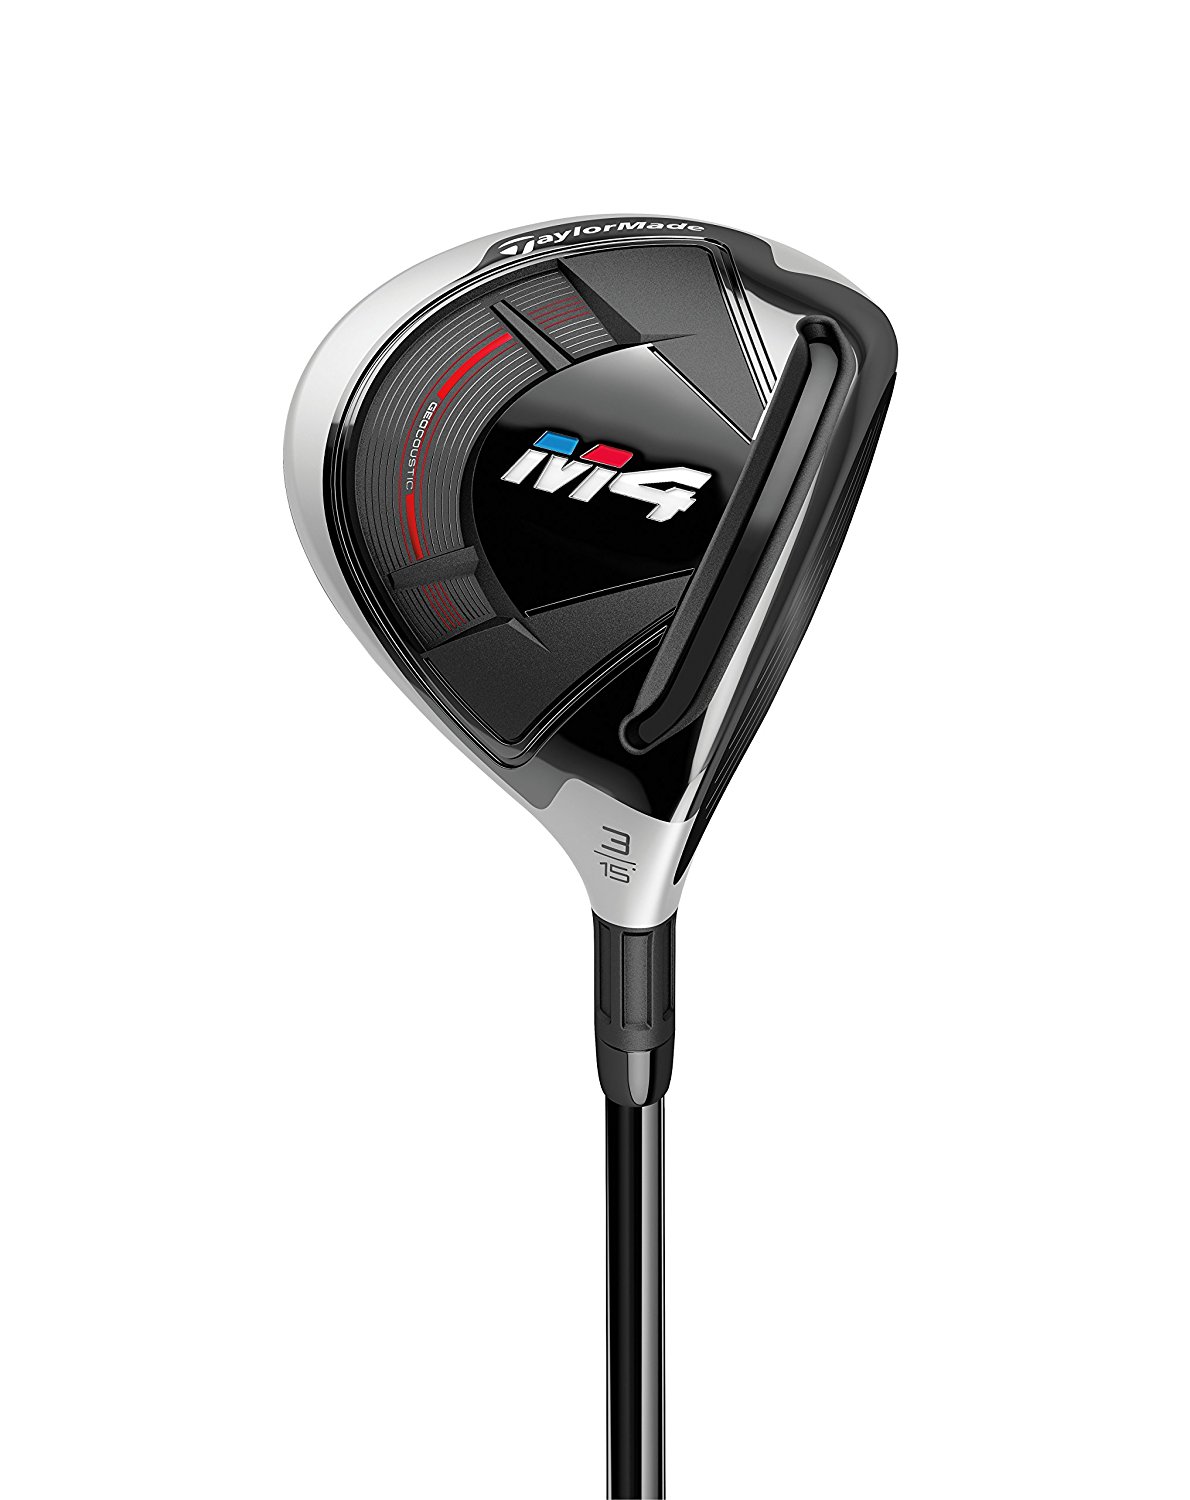 Top 5 Easiest to Hit Fairway Woods for high handicappers